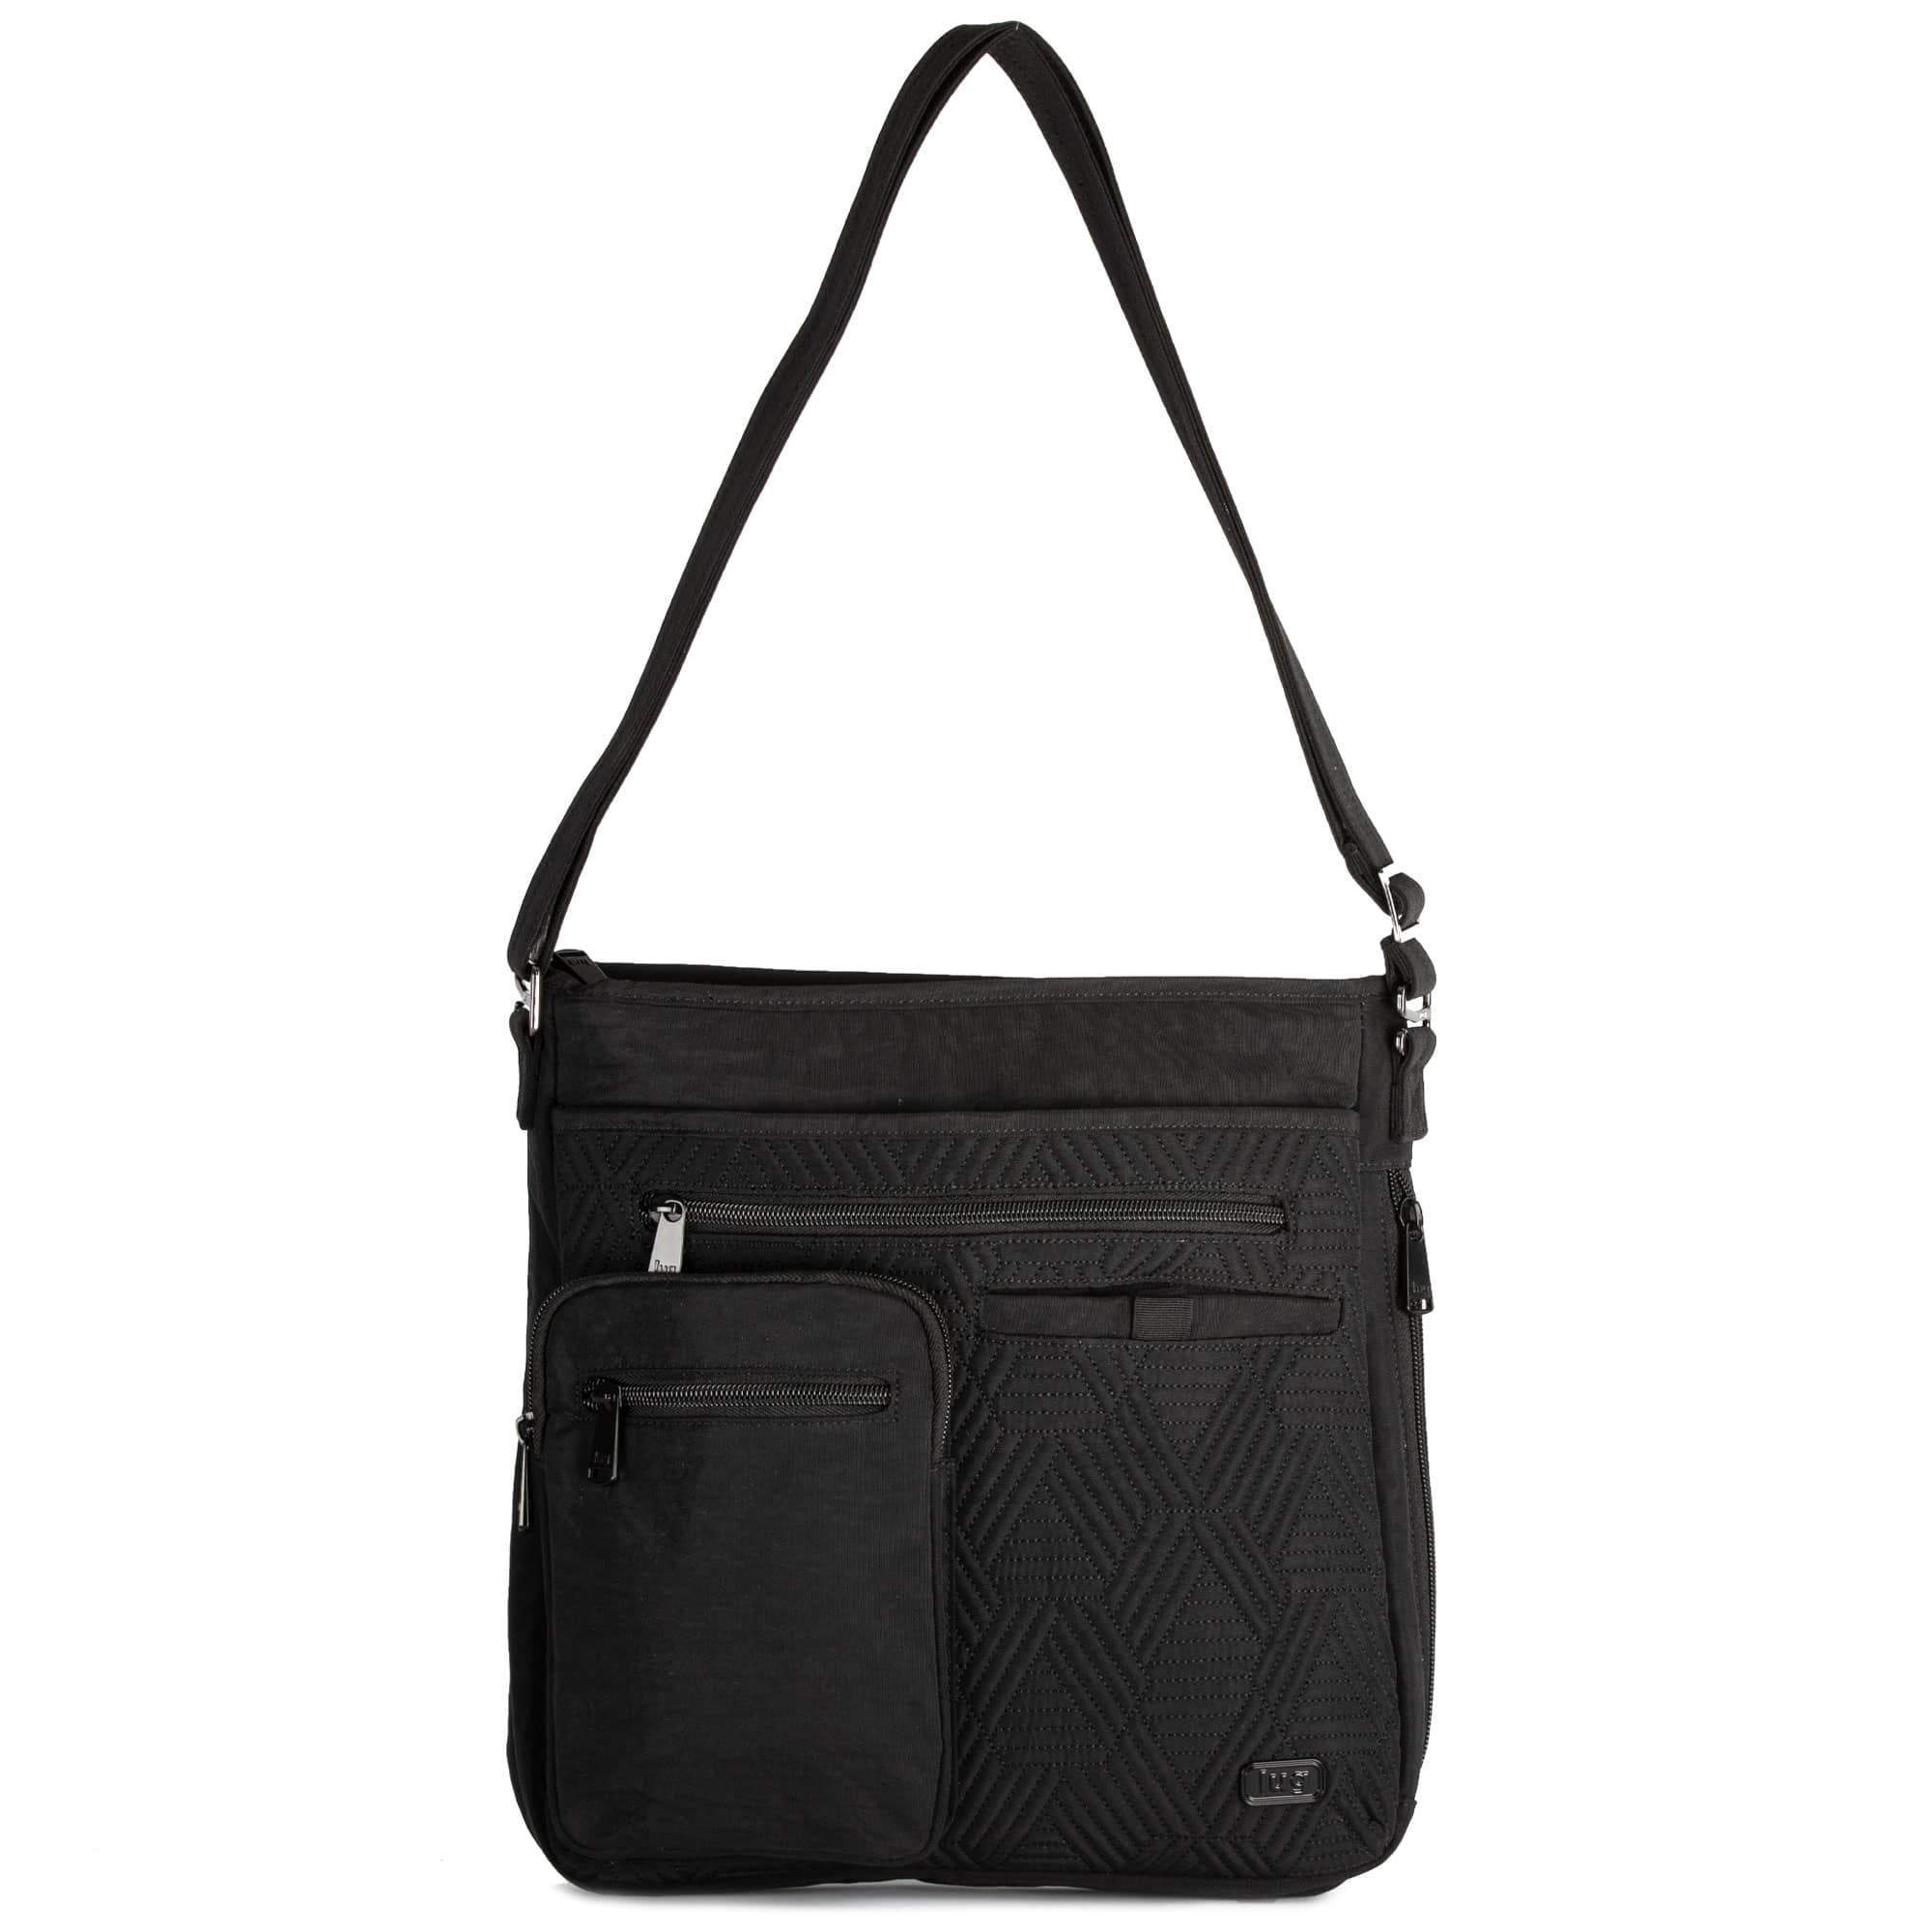 Lug Monorail Day Pack Tote - Blesket Canada